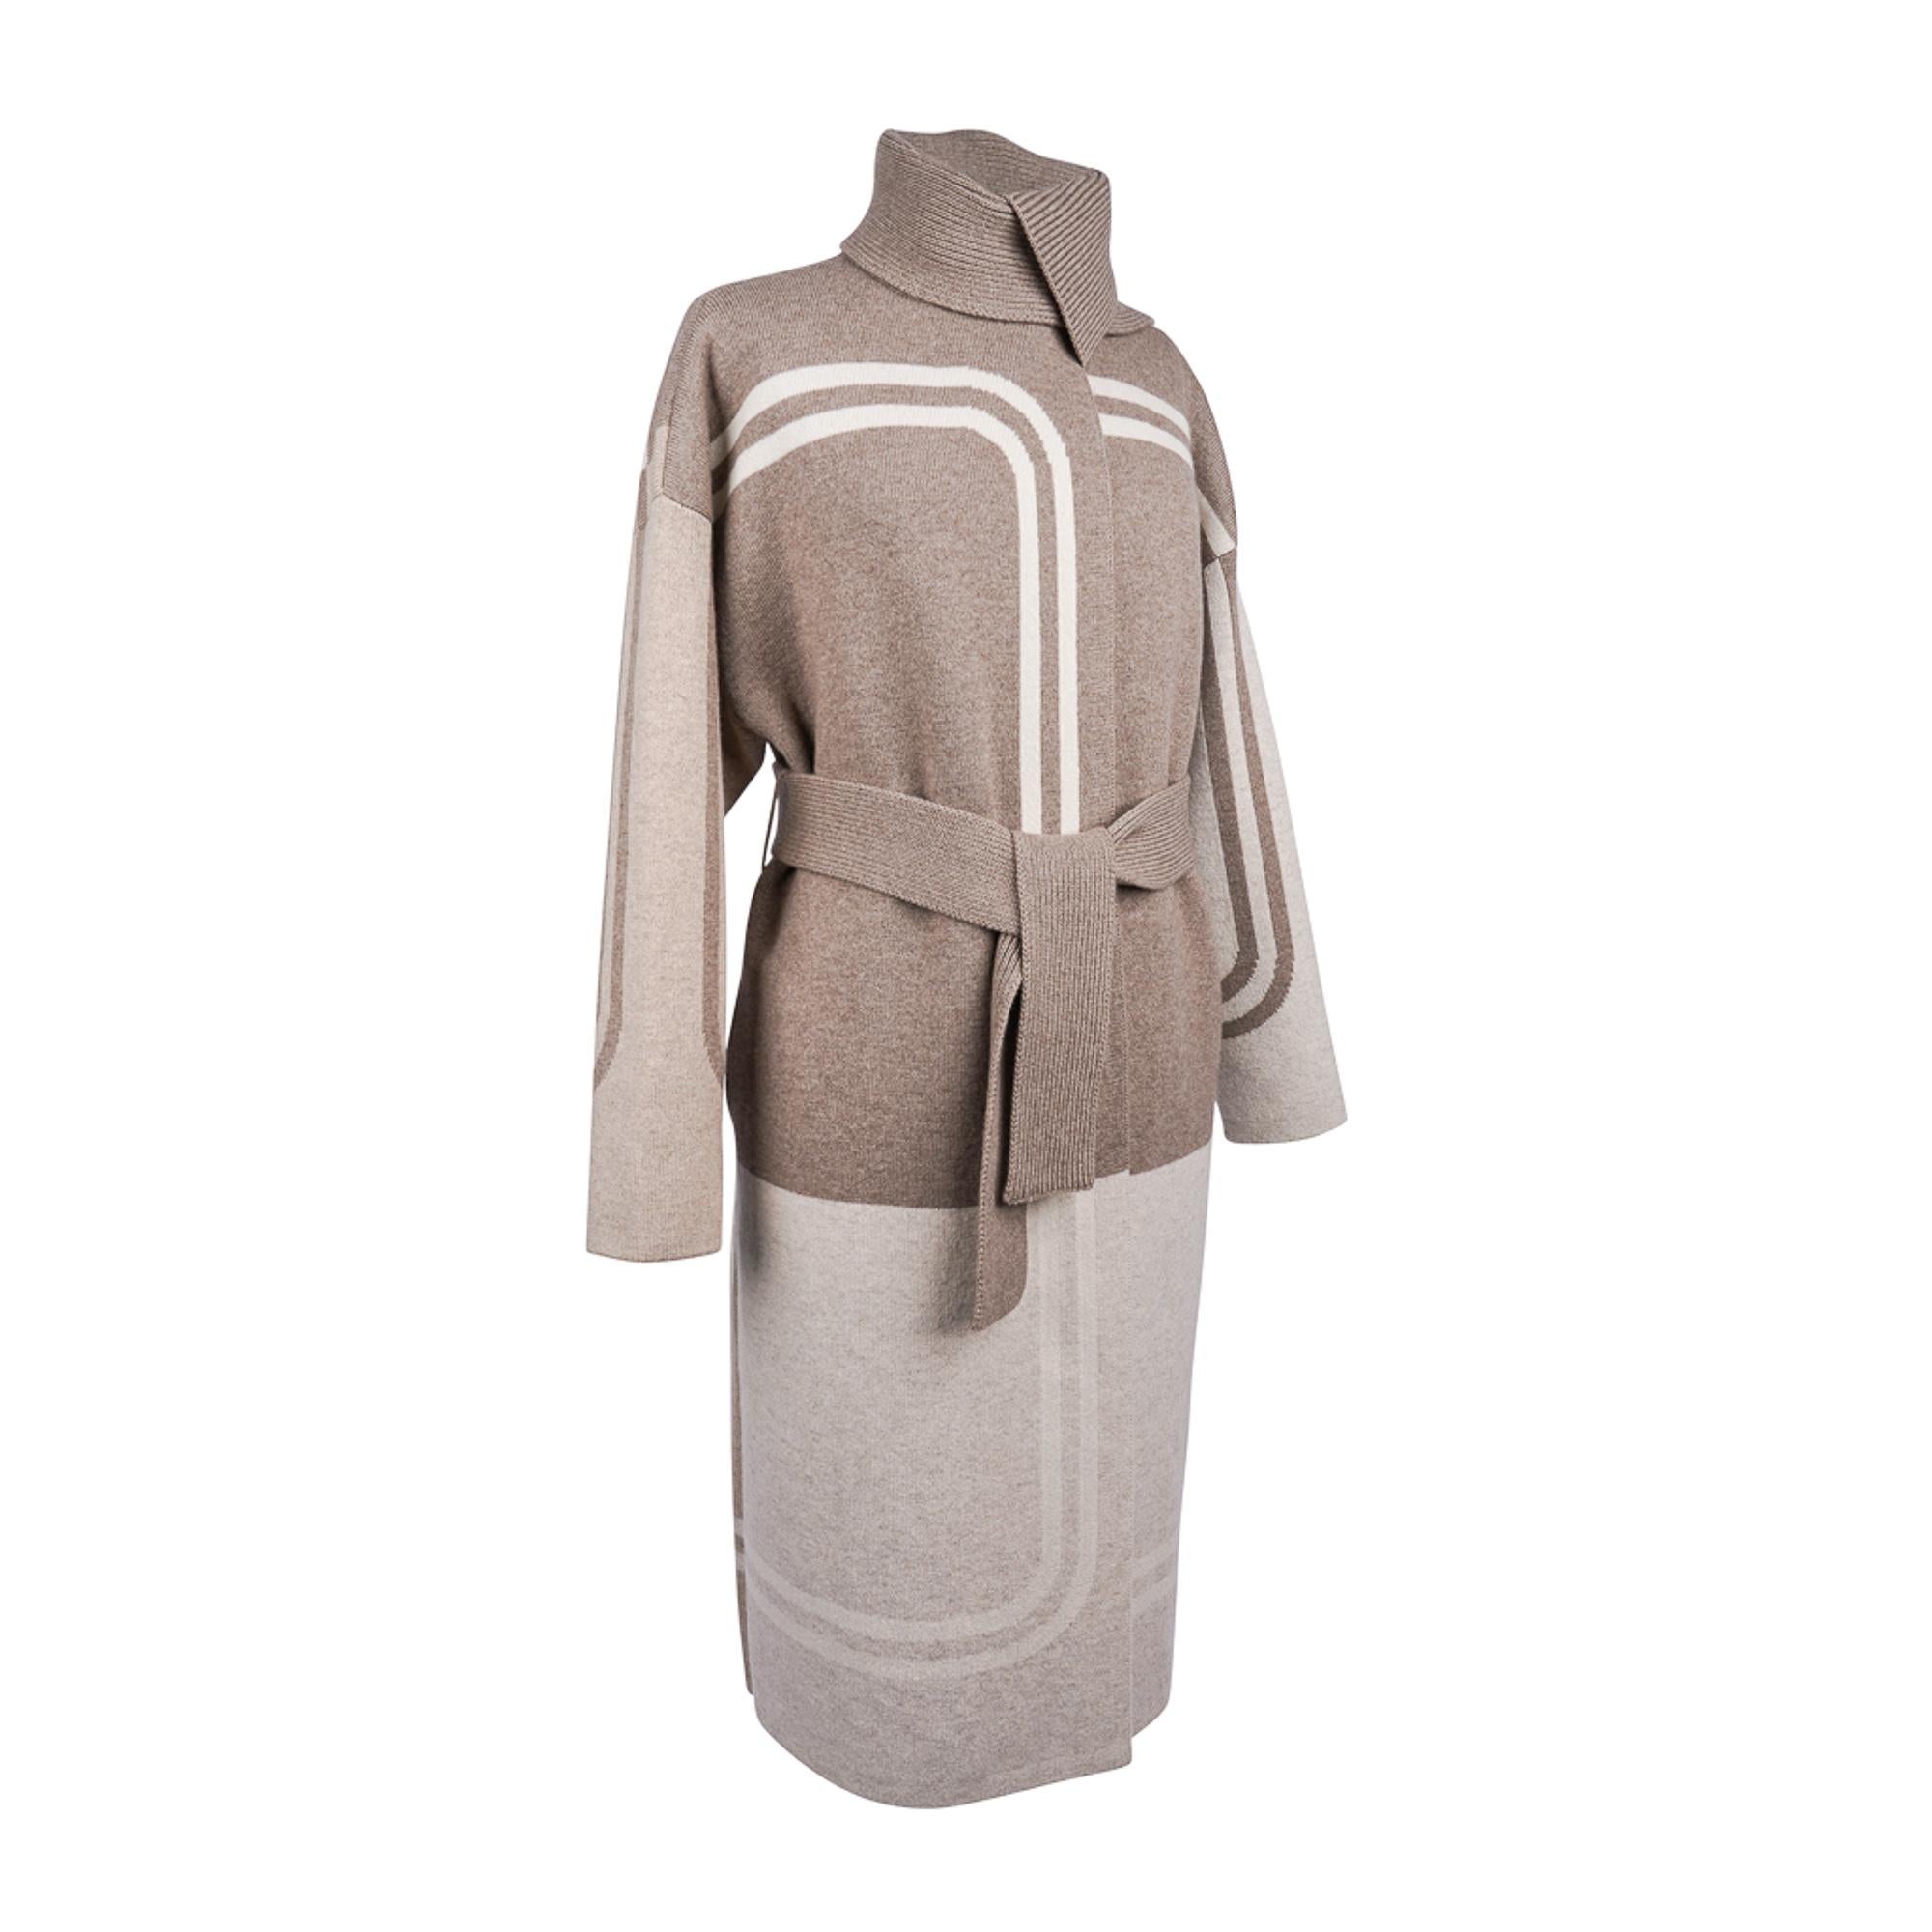 Mightychic offers an Hermes Long Coat depicting the iconic Brides de Gala design by Hugo Gyrgkar.
Expressed in Beige Lin Intarsia.
The coat is belted with a scarf collar and drop shoulder.
2 side pockets.
Simply stunning!
Fabric is Scottish